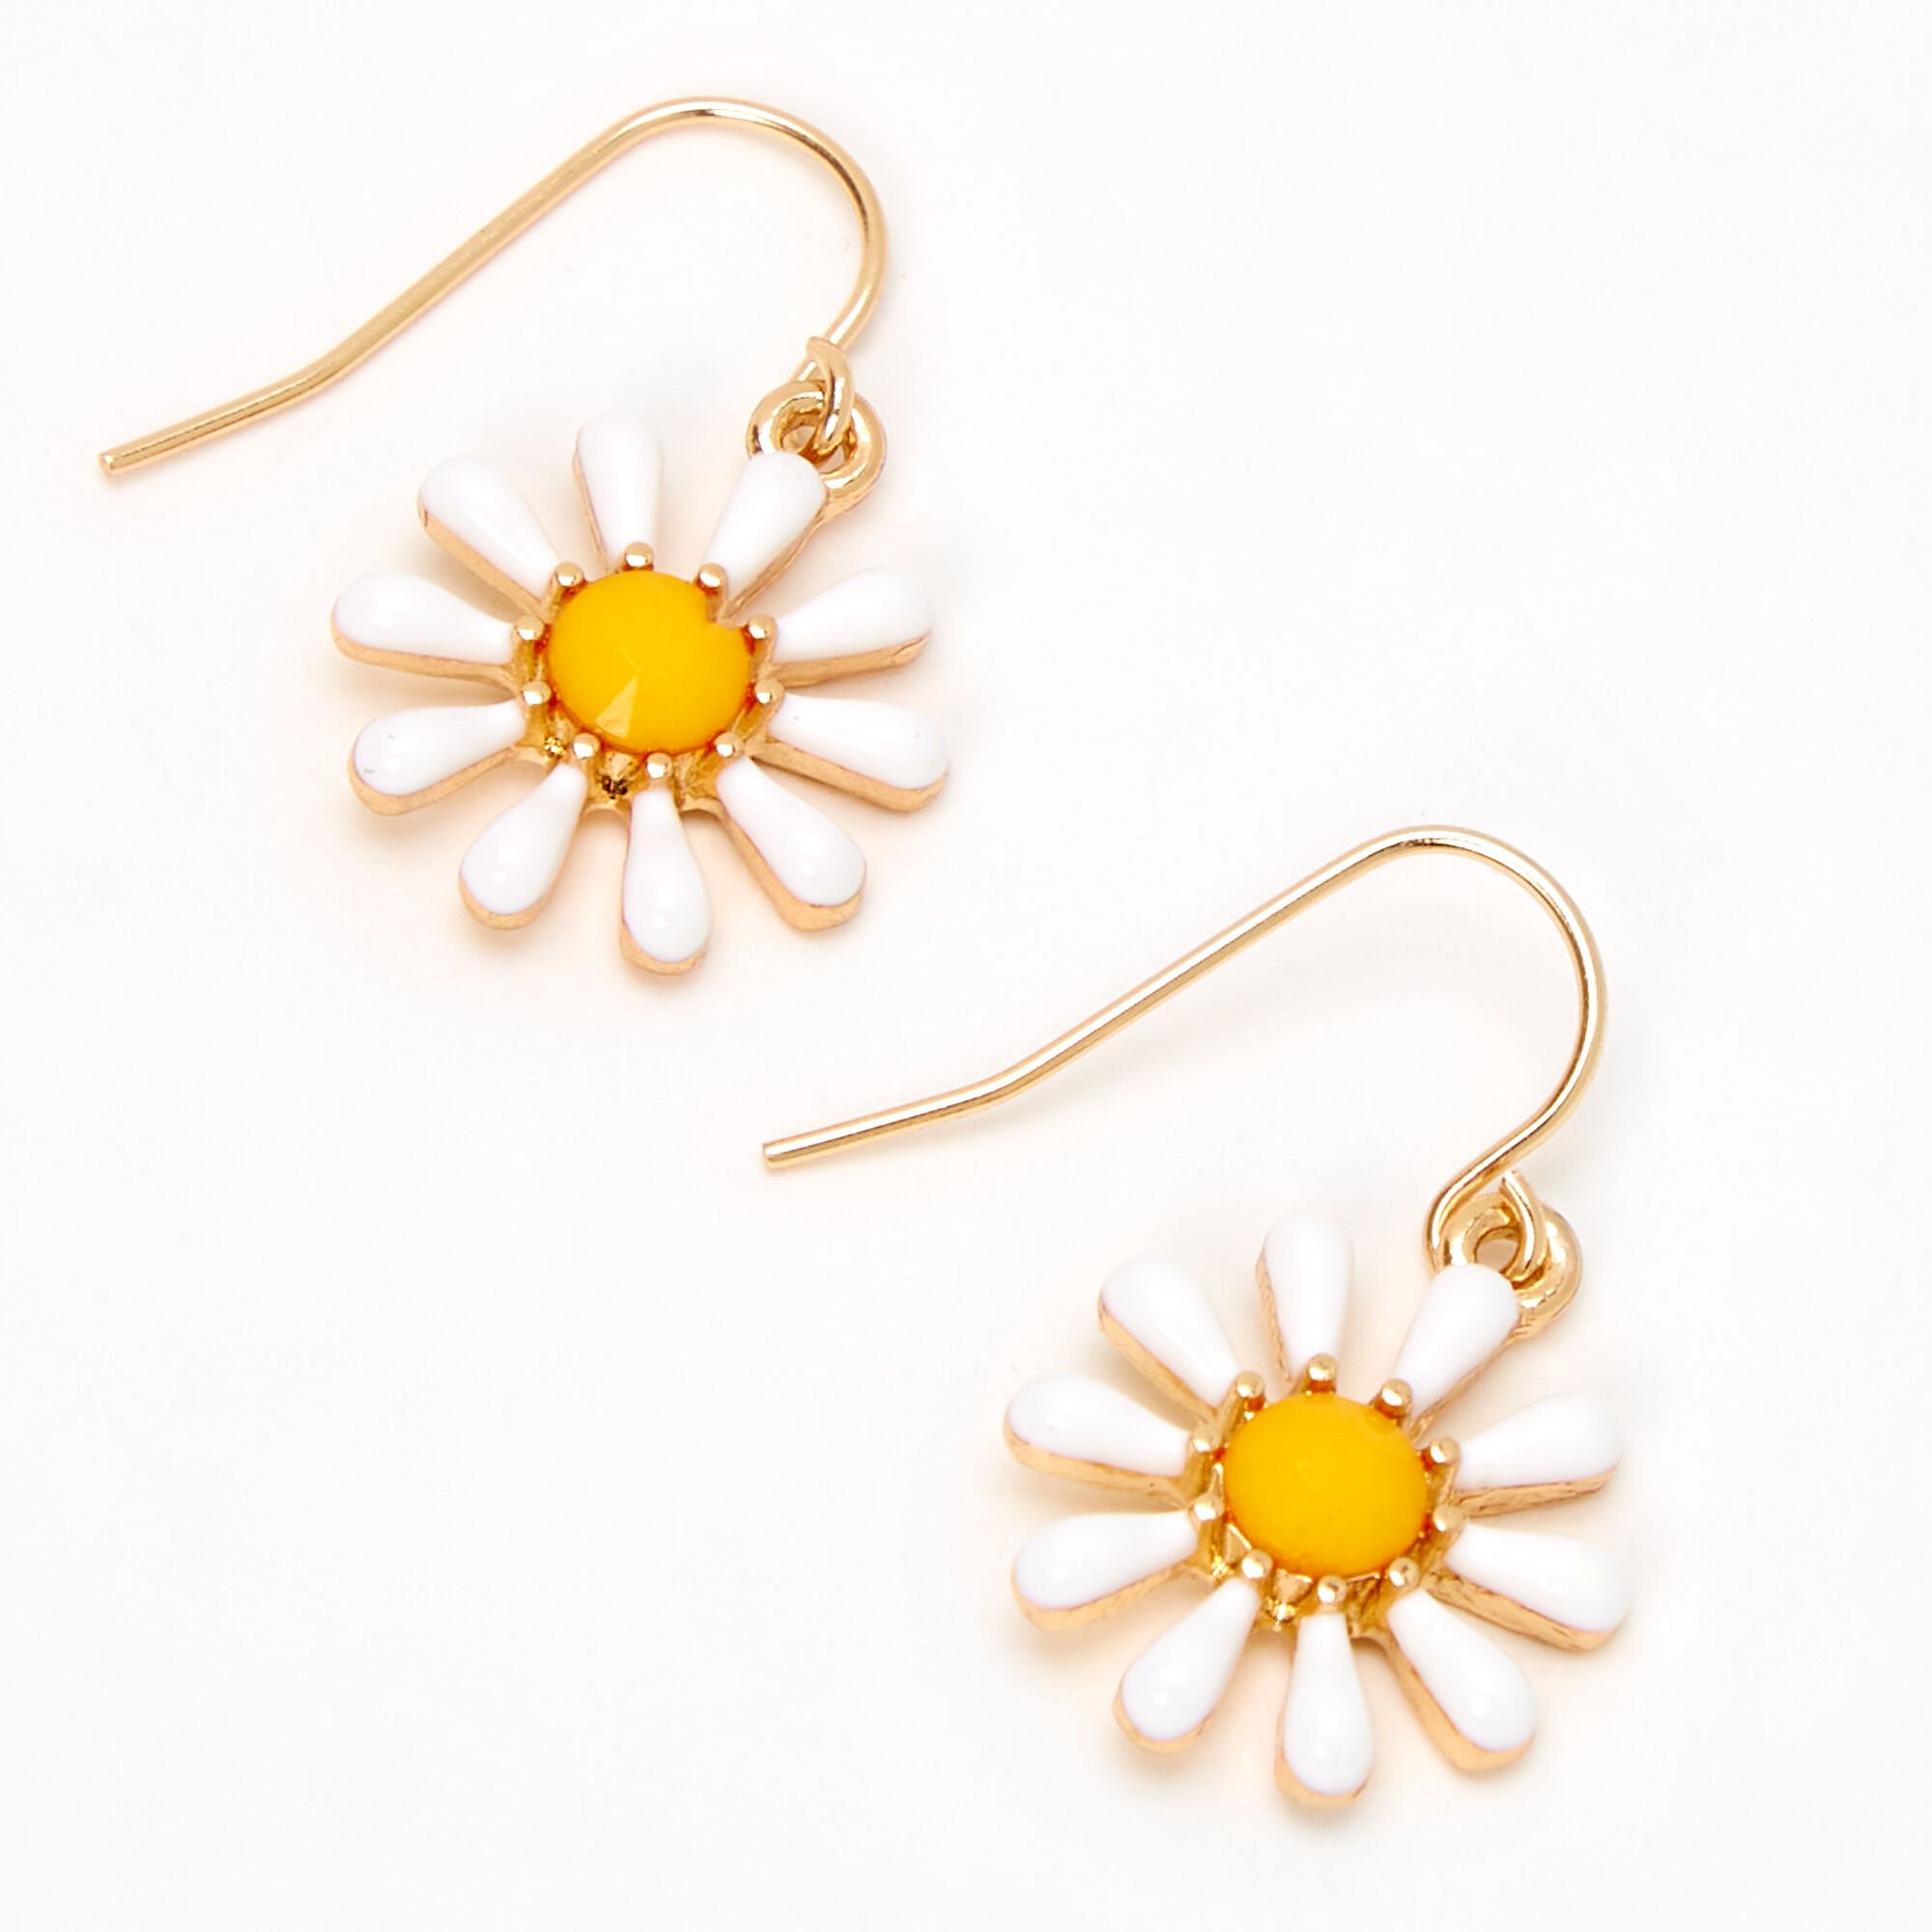 View Claires Gold 1 Daisy Drop Earrings White information